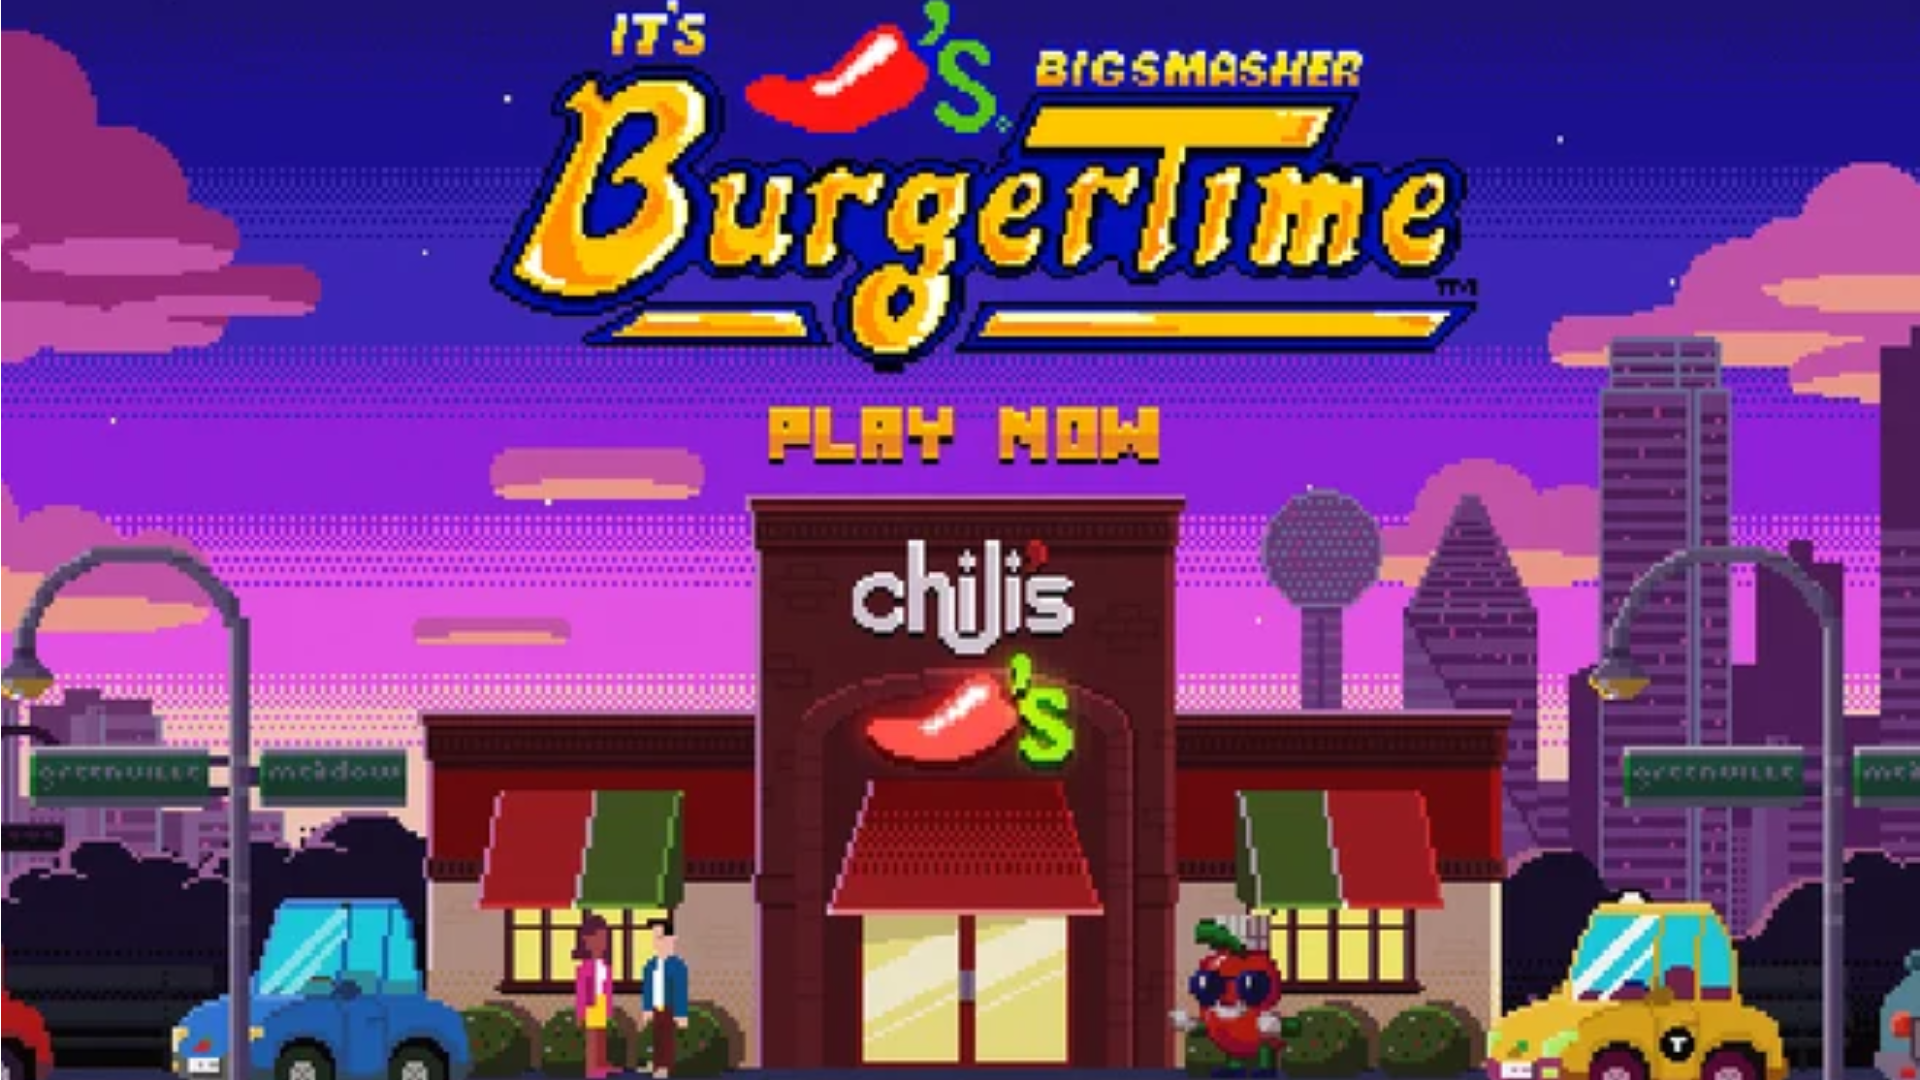 CHILI’S LATEST ATTACK ON FAST FOOD INCLUDES A 1980S-ERA VIDEO GAME